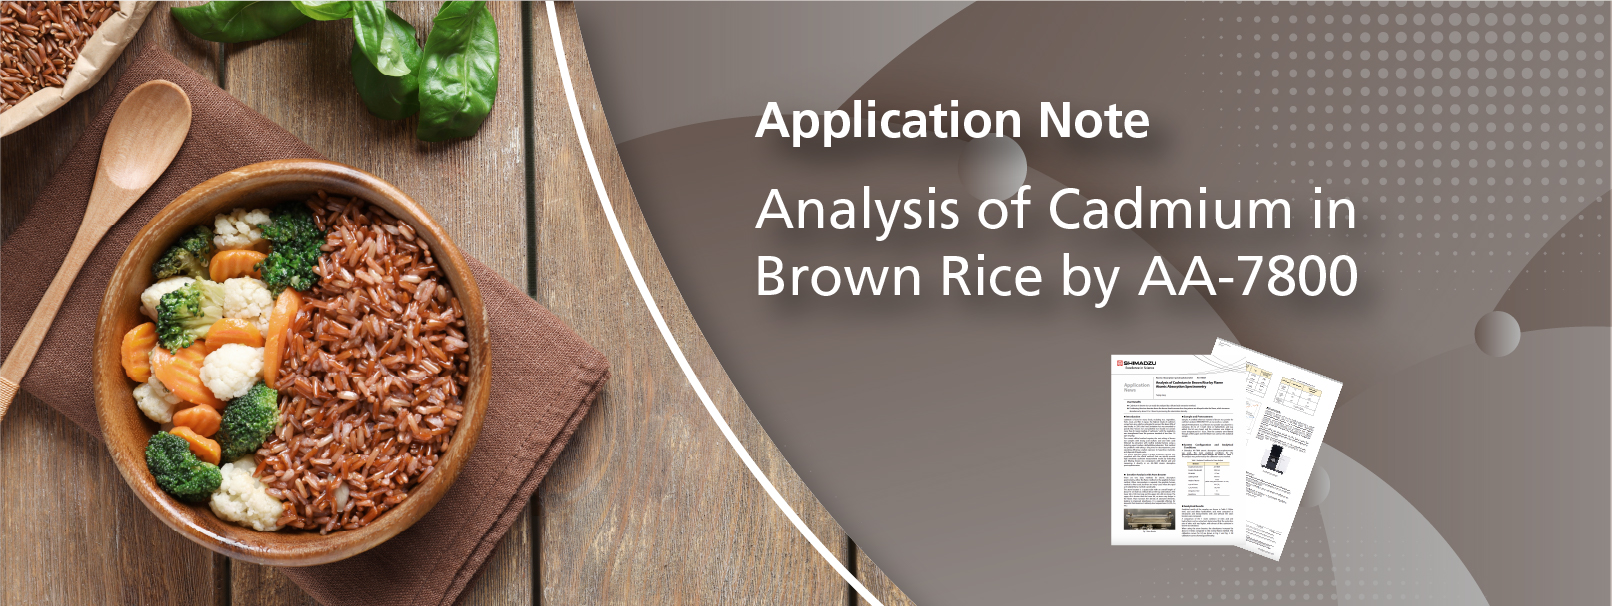 Analysis of Cadmium in Brown Rice by AA-7800